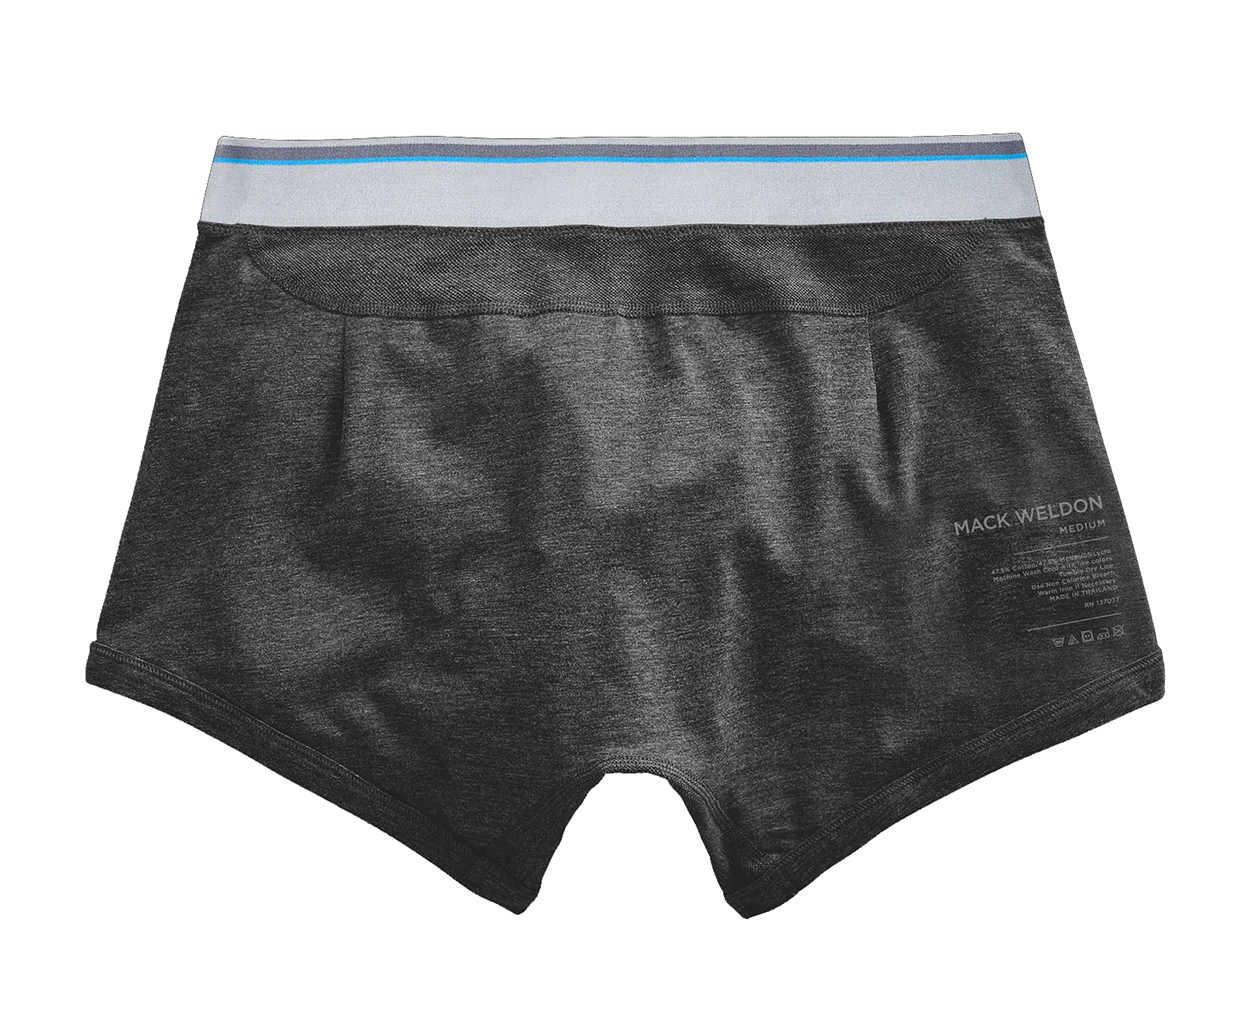 18-Hour Jersey Knit Boxer Seaplane Heather